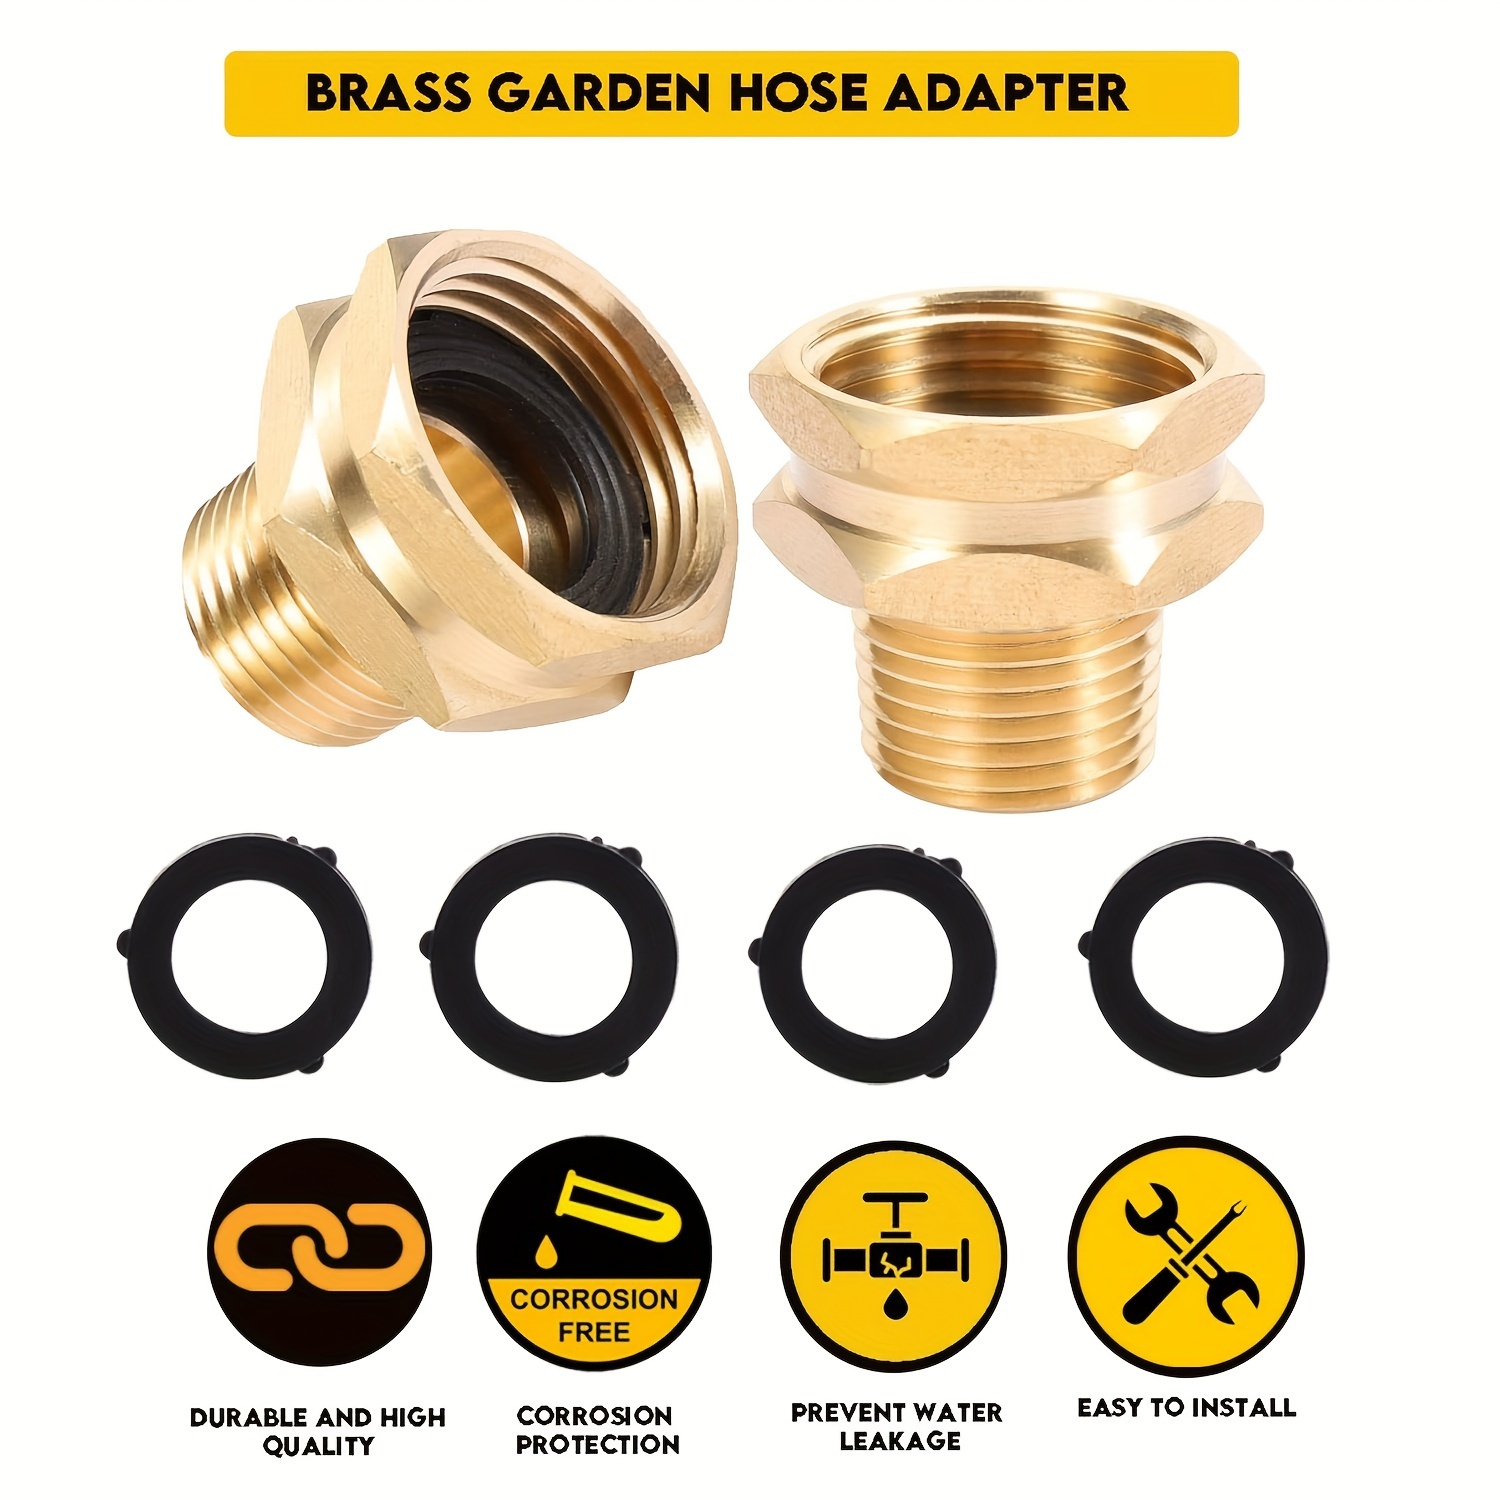 1 Set 3/4GHT Female To 1/2 NPT Male Connector, GHT To NPT Adapter Brass  Fitting, Garden Hose Thread Metal Brass Adapters, Includes 4 Washers With 2